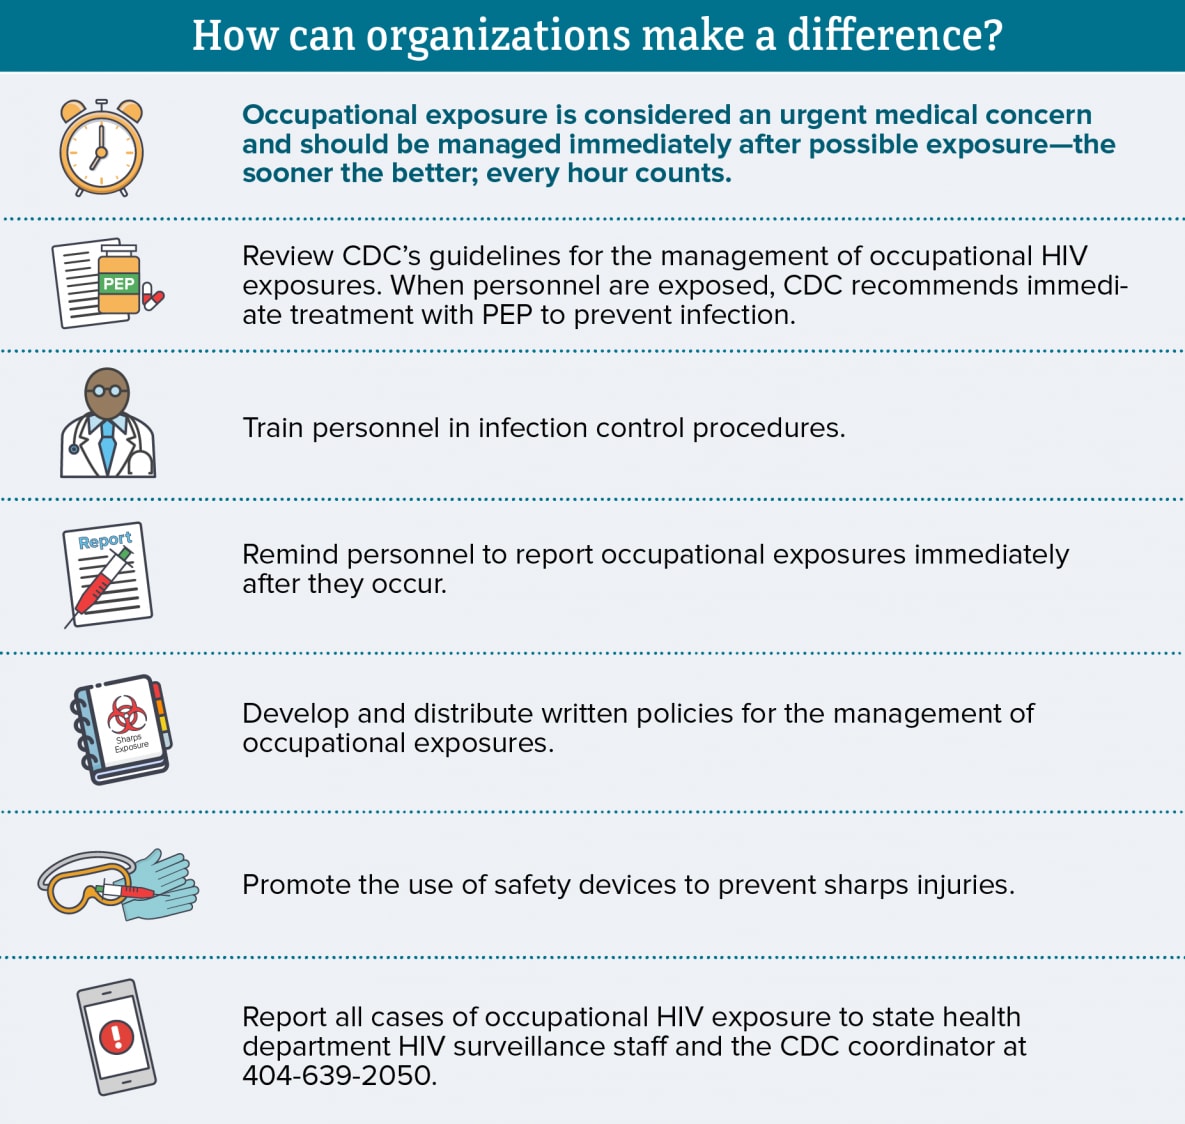 This chart shows how organizations can make a difference. Occupational exposure is considered an urgent medical concern and should be managed immediately after possible exposure – the sooner the better; every hour counts. Review CDC’s guidelines for the management of occupational HIV exposures. When personnel are exposed, CDC recommends immediate treatment with PEP to prevent infection. Train personnel in infection control procedures. Remind personnel to report occupational exposures immediately after they occur. Develop and distribute written policies for the management of occupational exposures. Promote the use safety devices to prevent sharps injuries. Report all cases of occupational HIV exposure to state health department HIV surveillance staff and the CDC coordinator at 404-639-2050.